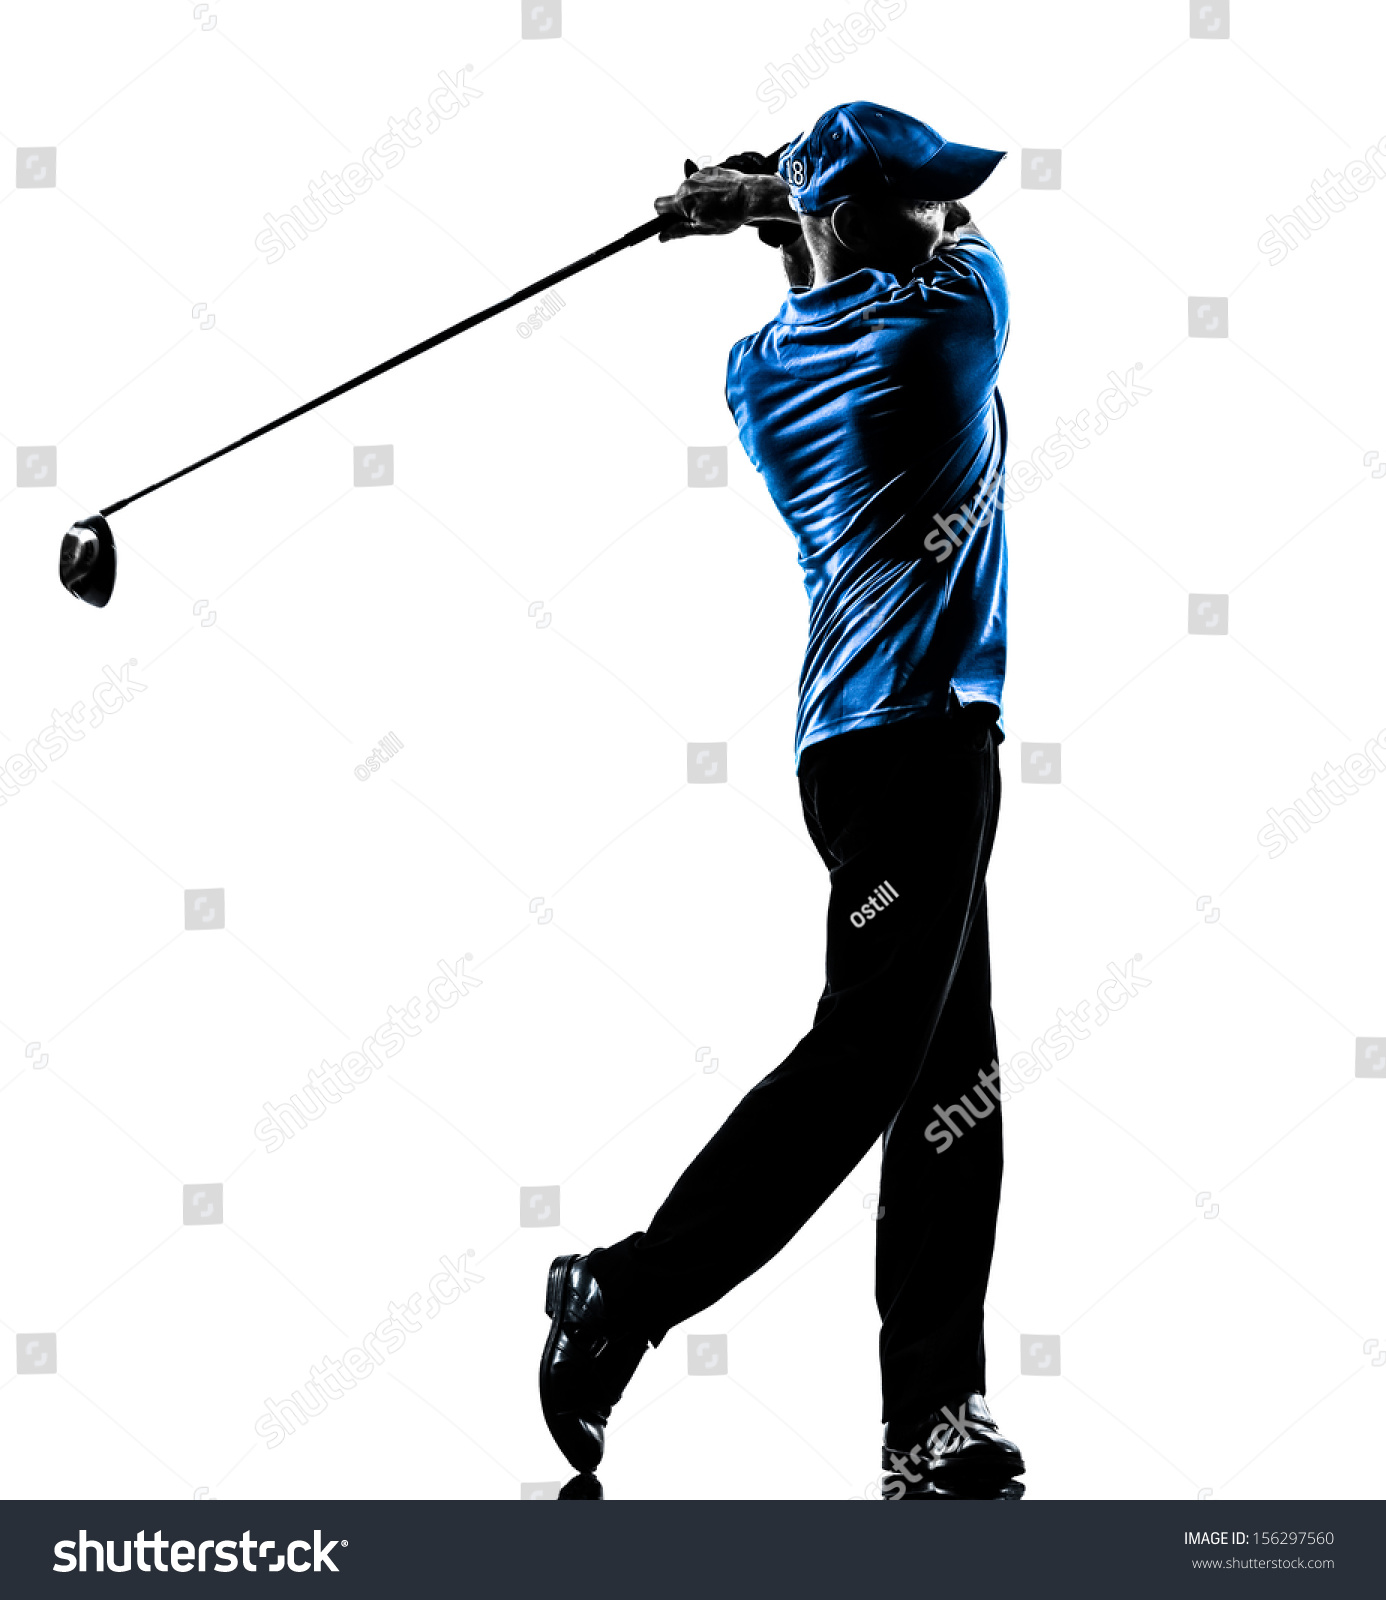 one man golfer golfing golf swing in silhouette studio isolated on white background #156297560